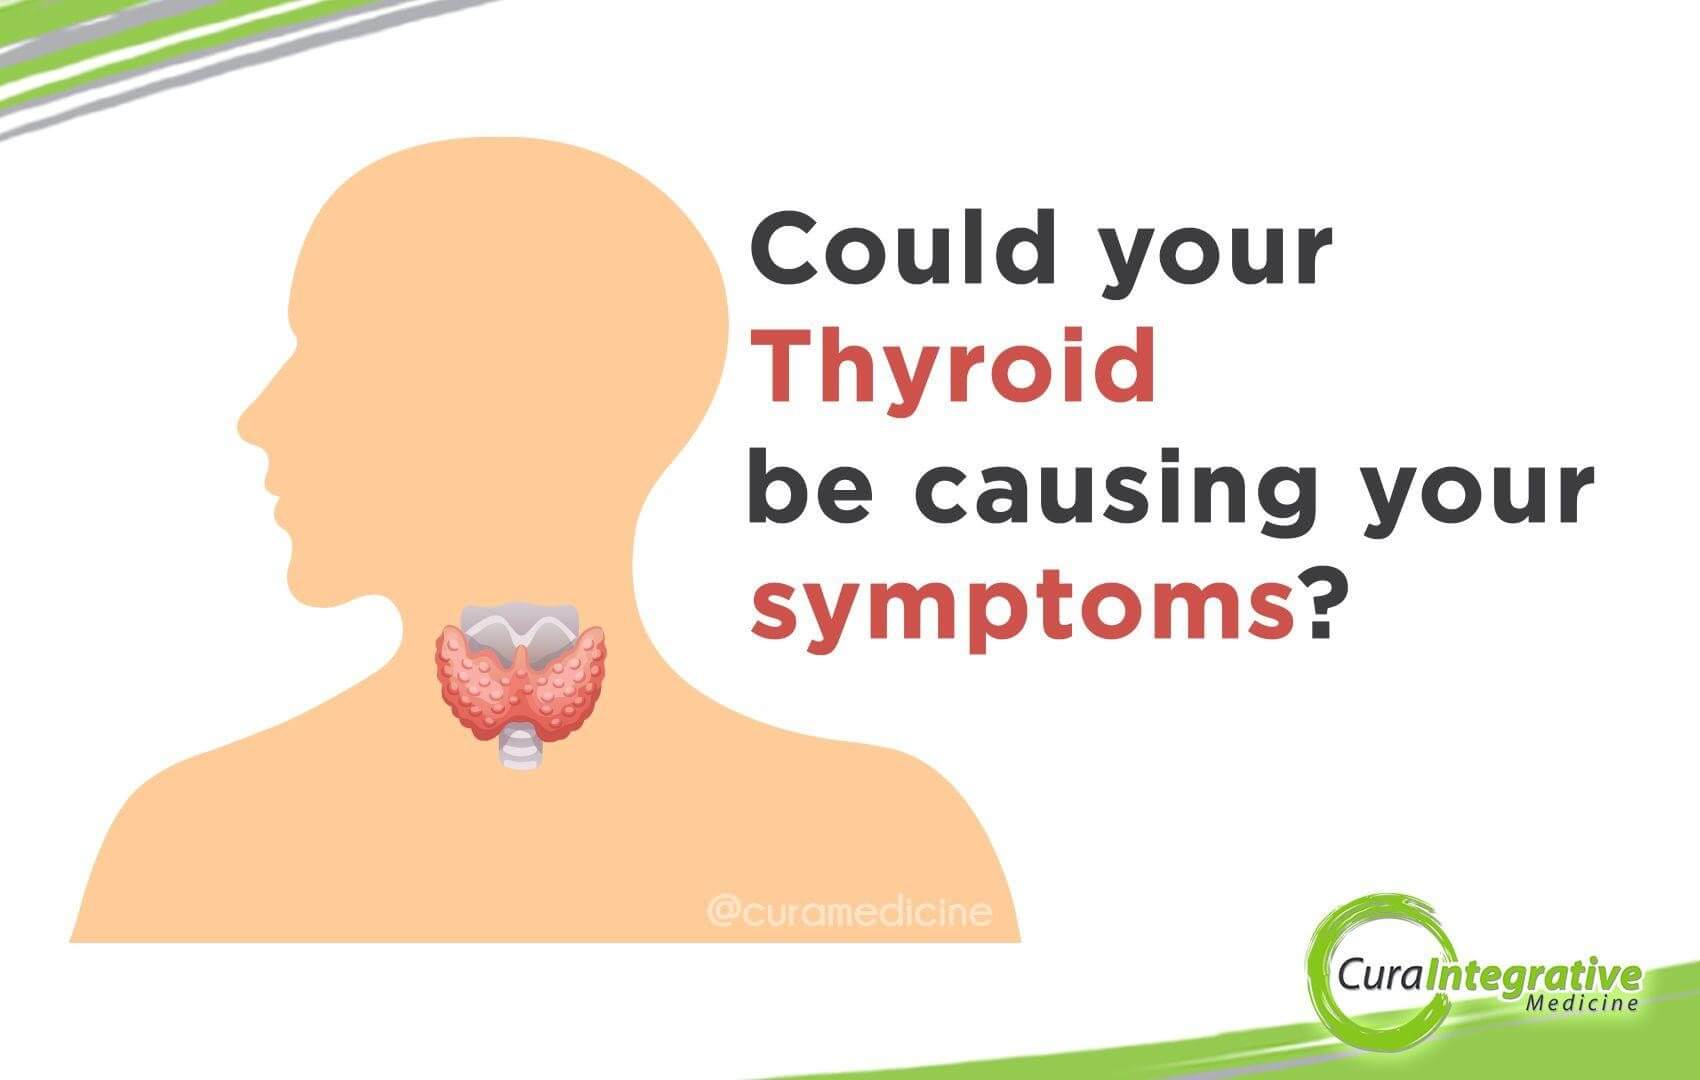 Could Your Thyroid Be Causing Your Symptoms?